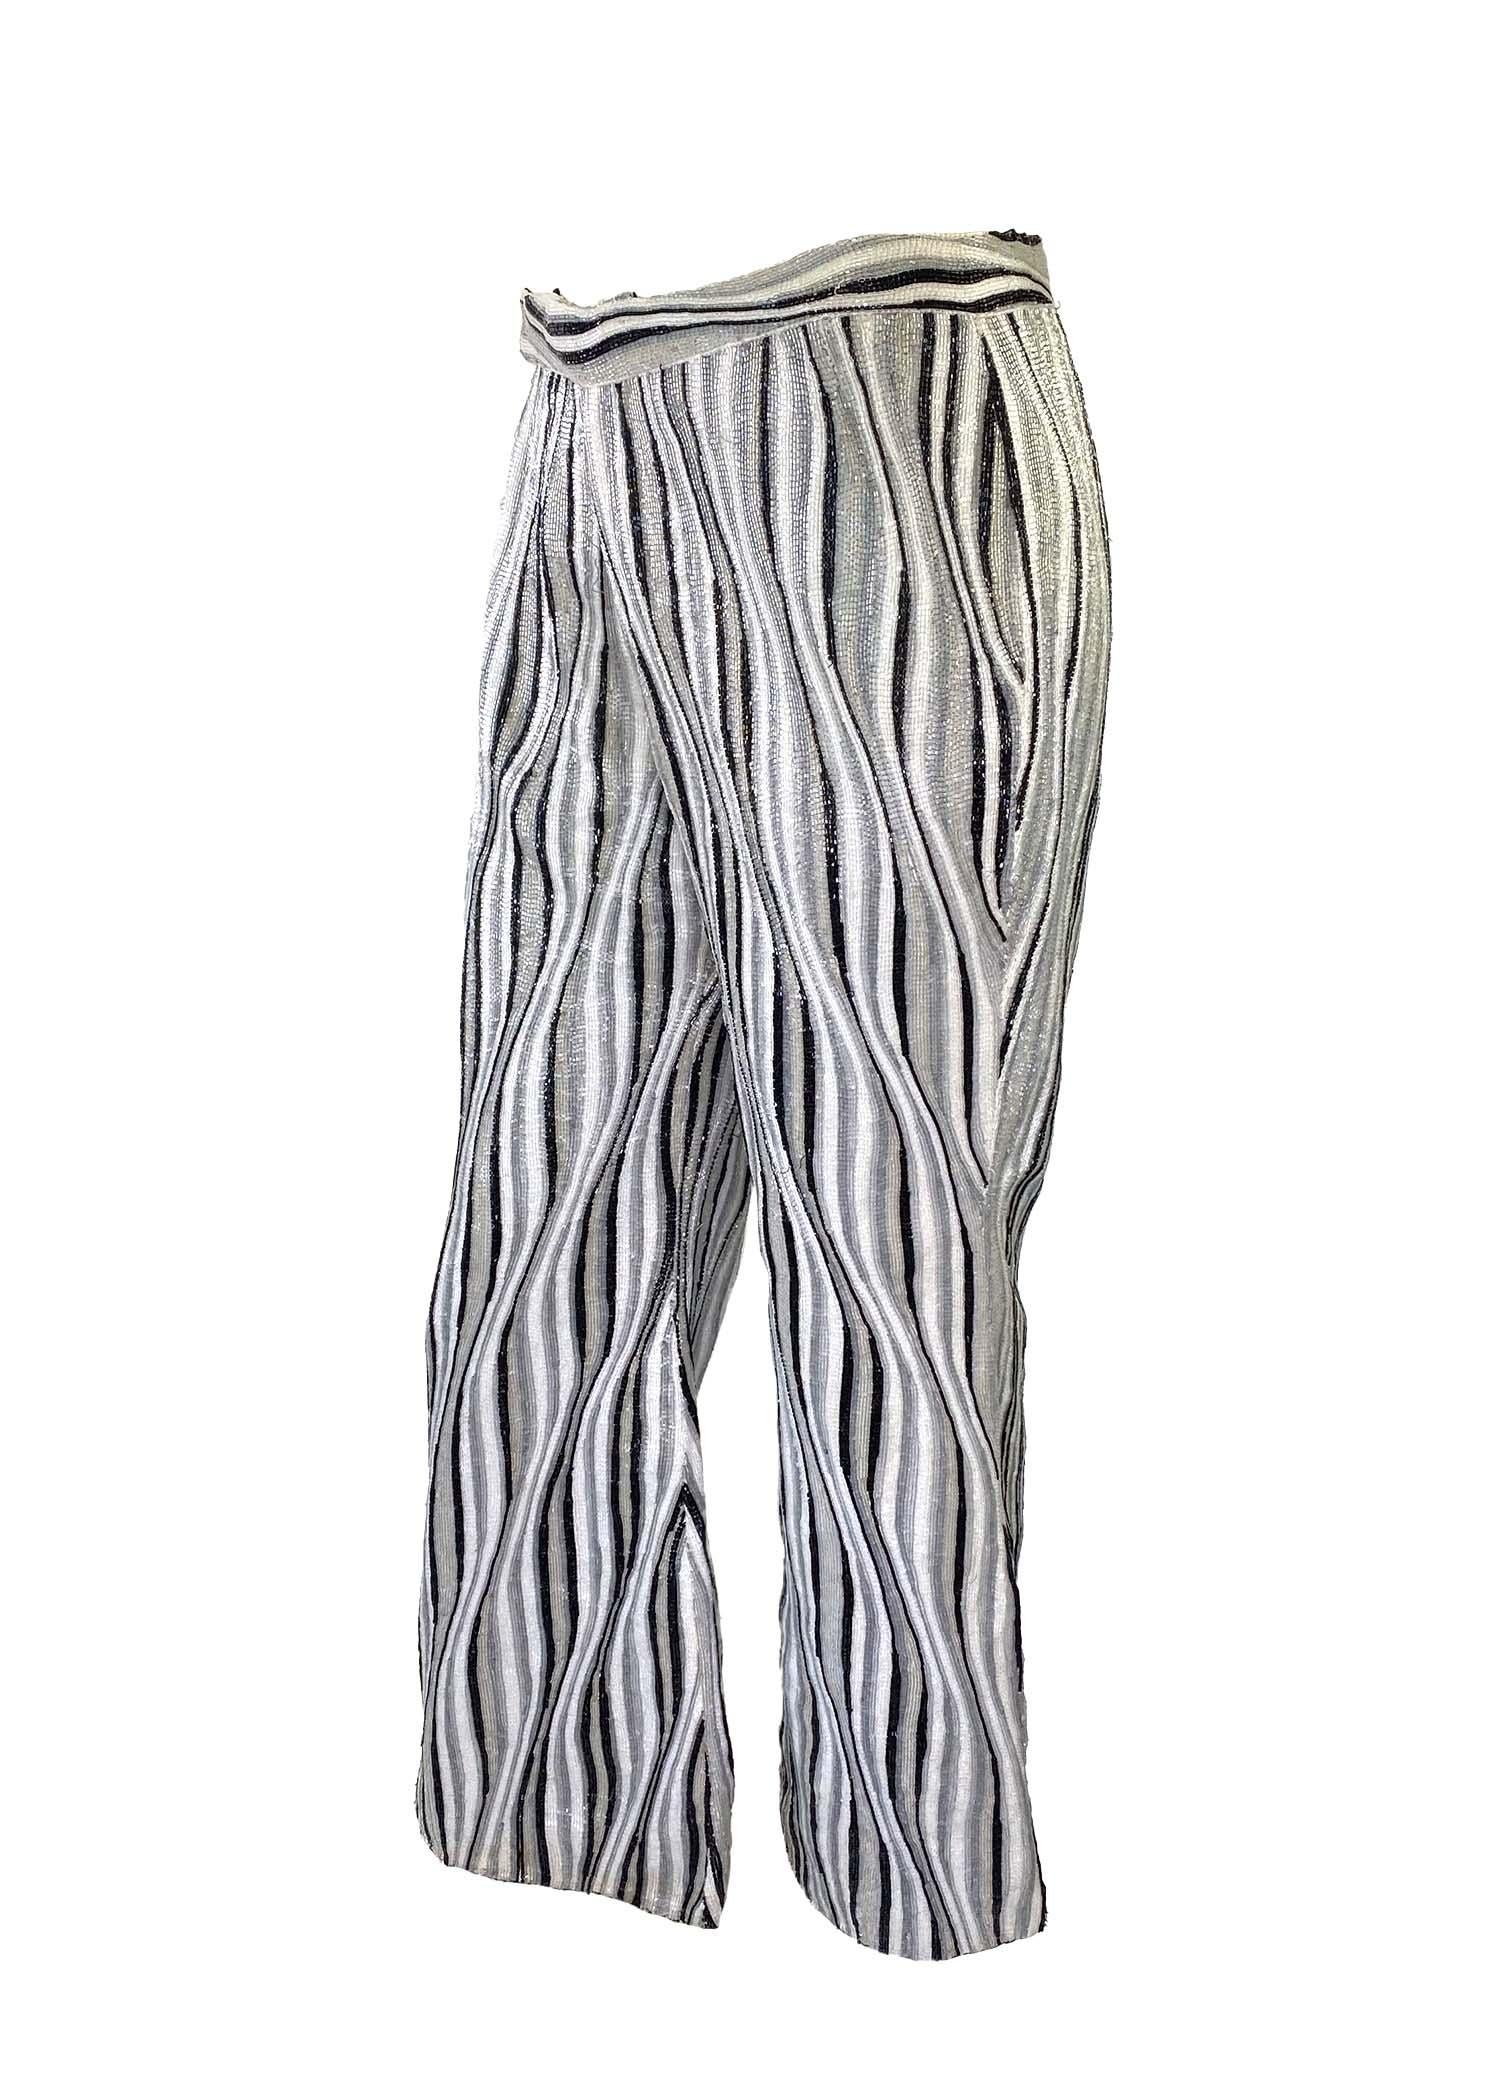 S/S 2000 Gucci by Tom Ford Heavily Beaded Striped Pants Black White Grey Runway For Sale 2